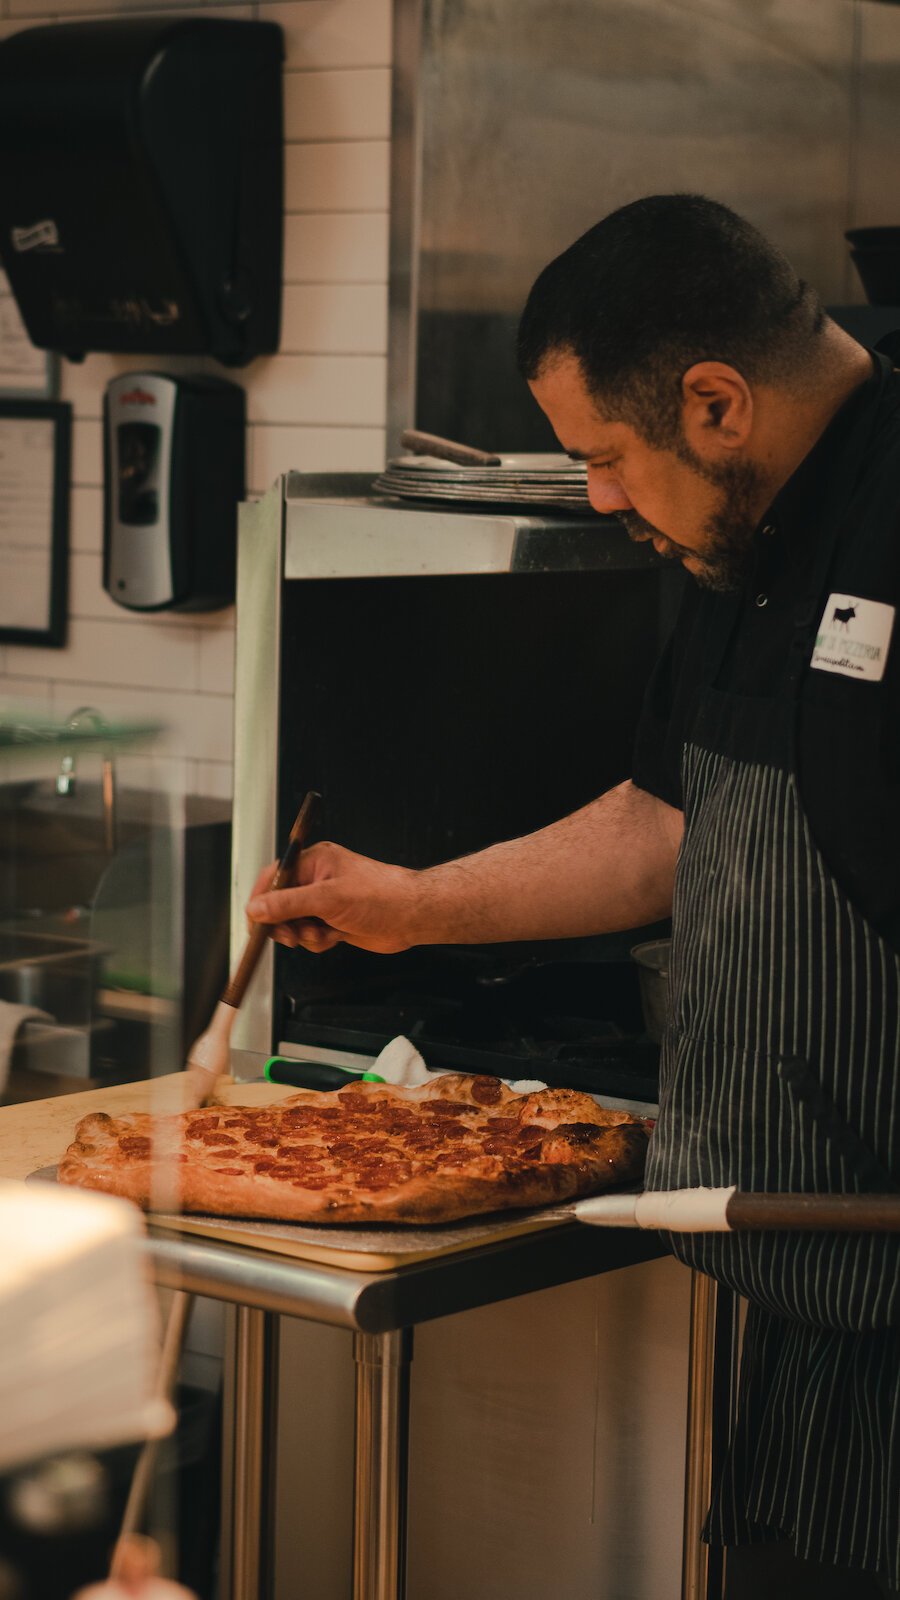 Owner of Johnny OX Pizzeria, Johnny Bojinoff, brushes a freshly made pizza.